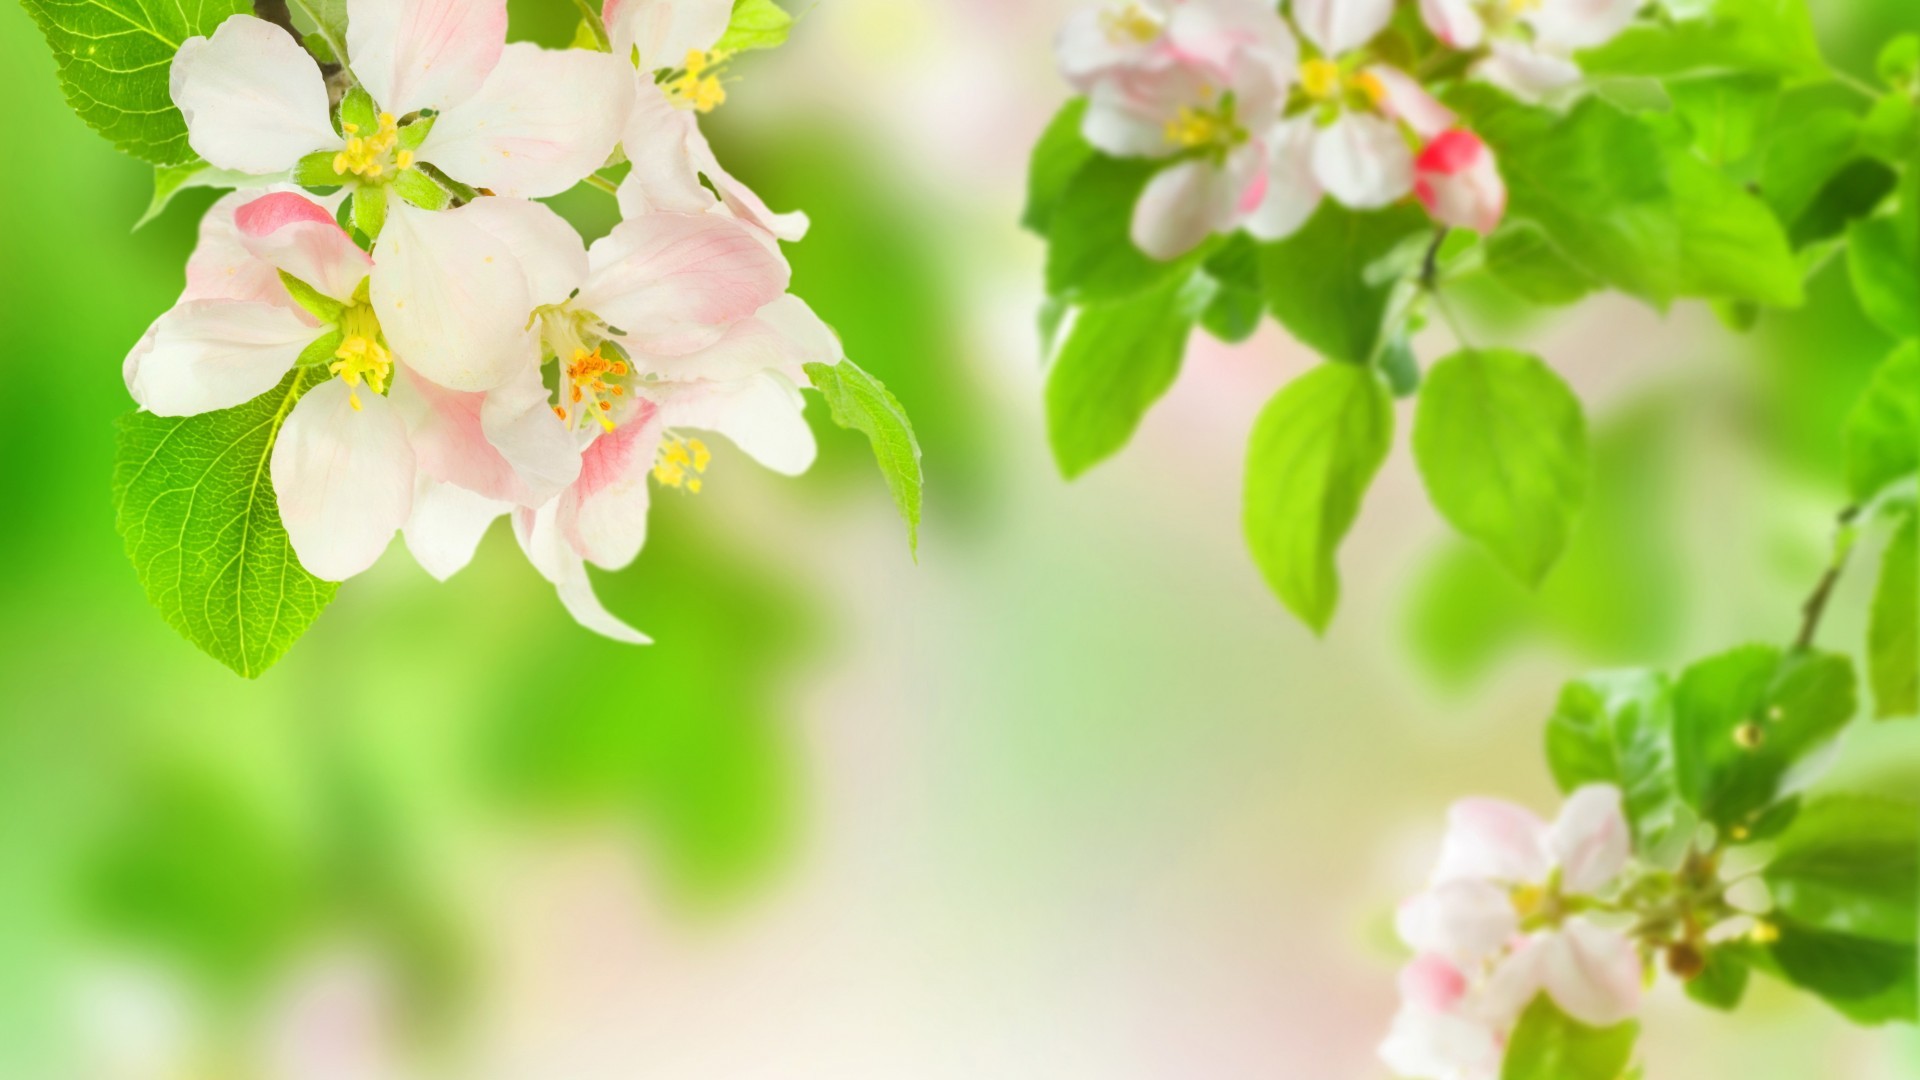 General 1920x1080 blossoms branch leaves spring green background flowers plants nature vibrant